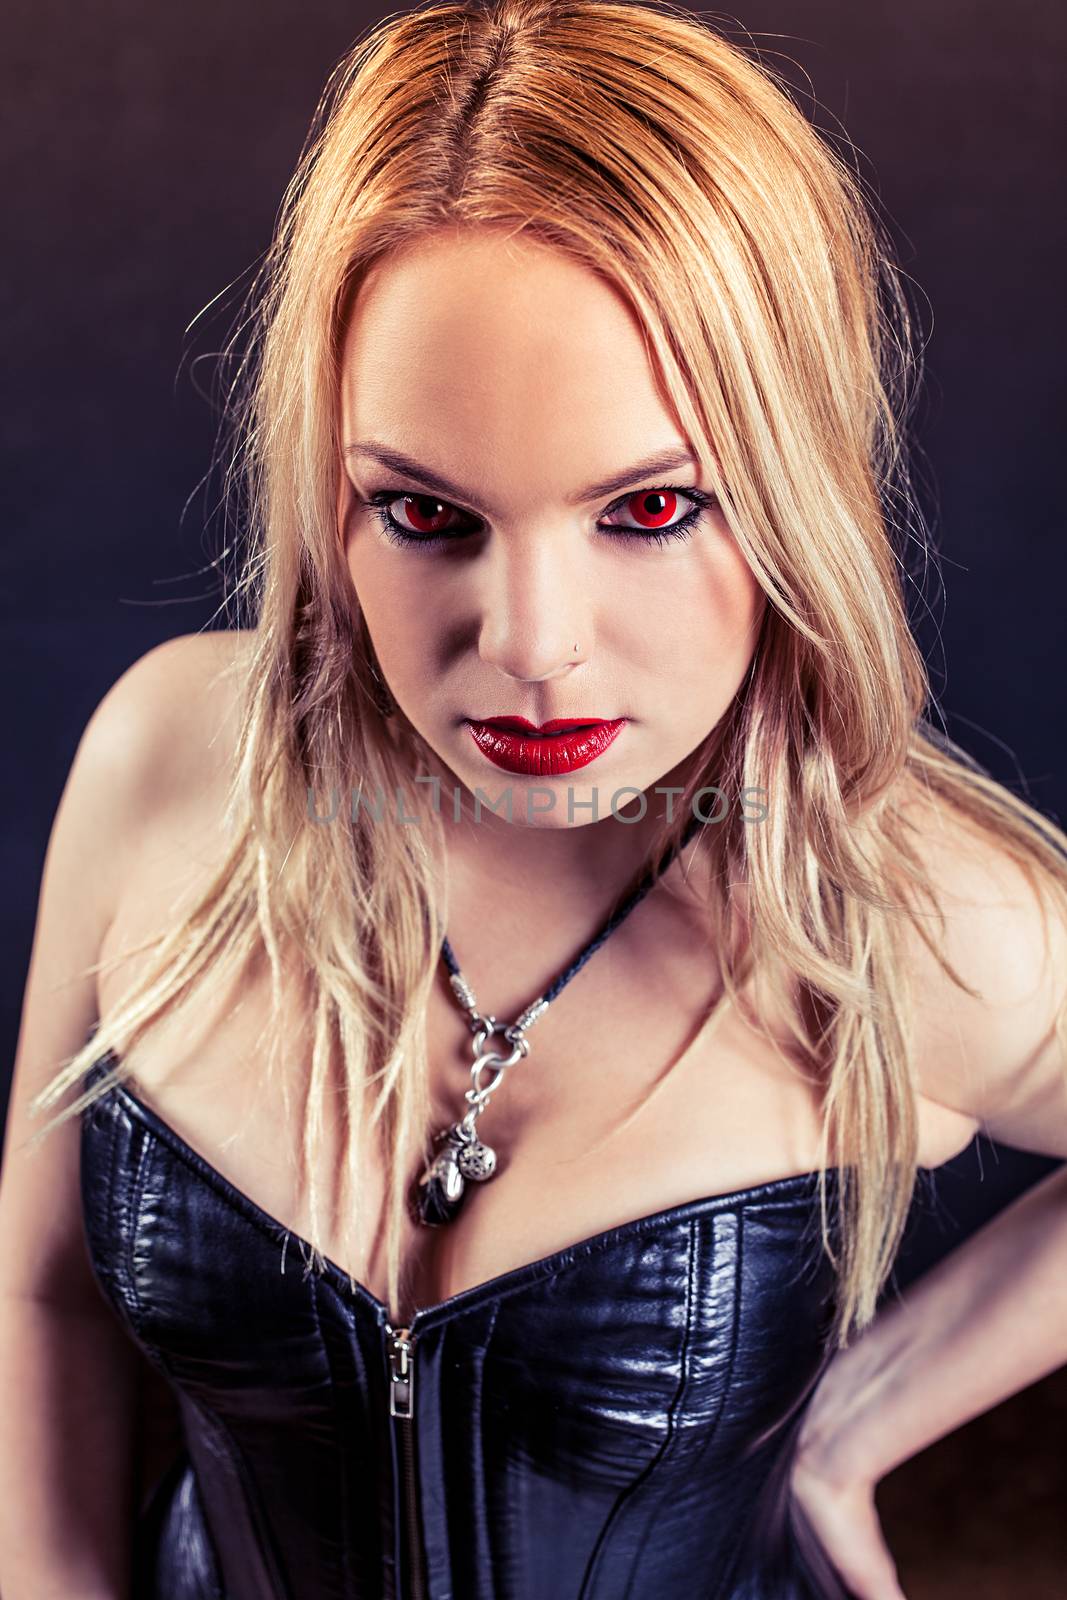 Photo of a woman with red eyes and red lipstick wearing a black leather corset.  Harsh lighting and filtered for scarier feel.